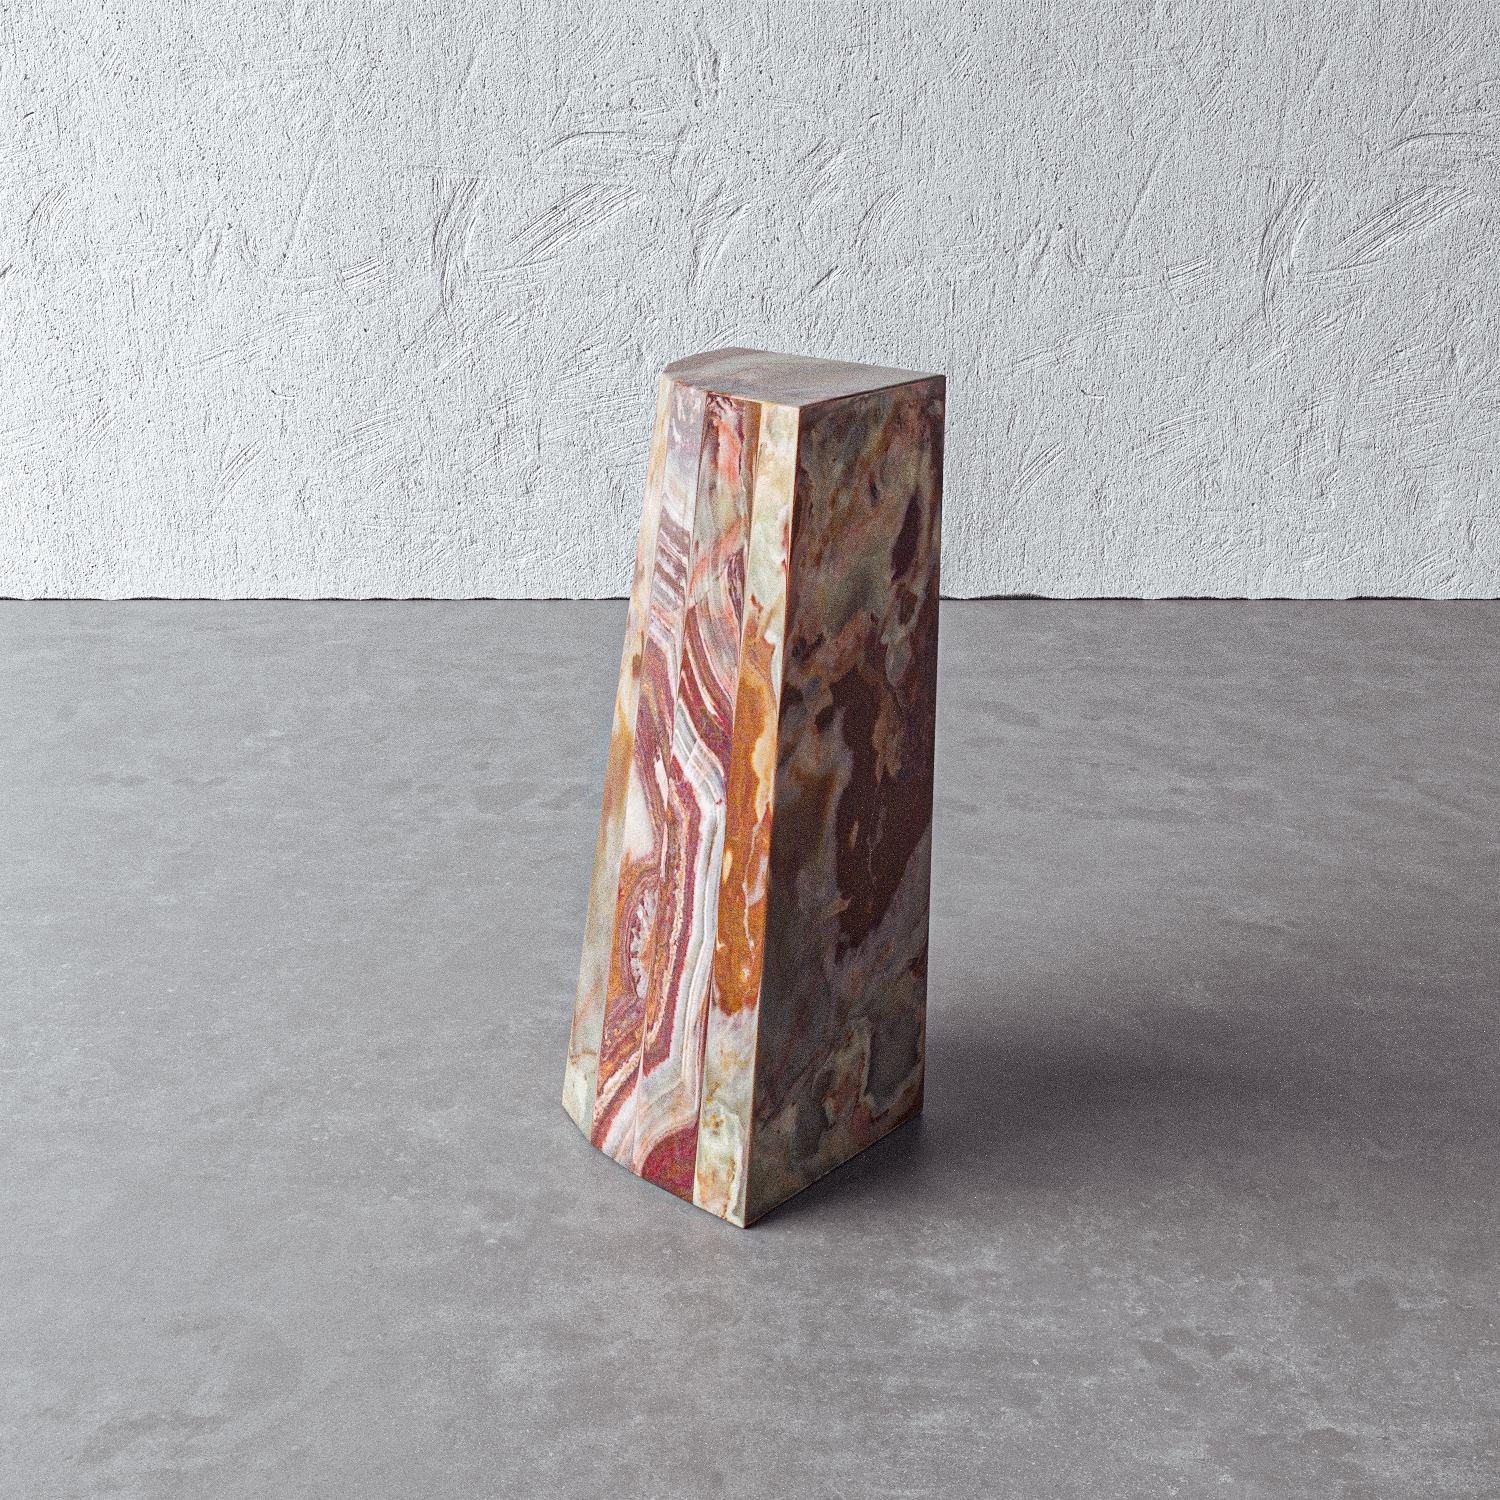 Red dragon onyx forms a functional side table that also works as a pedestal or stand-alone accent sculpture. Stackable. Handmade by artisans in Vietnam, the piece adds a bold dimension to any space.

